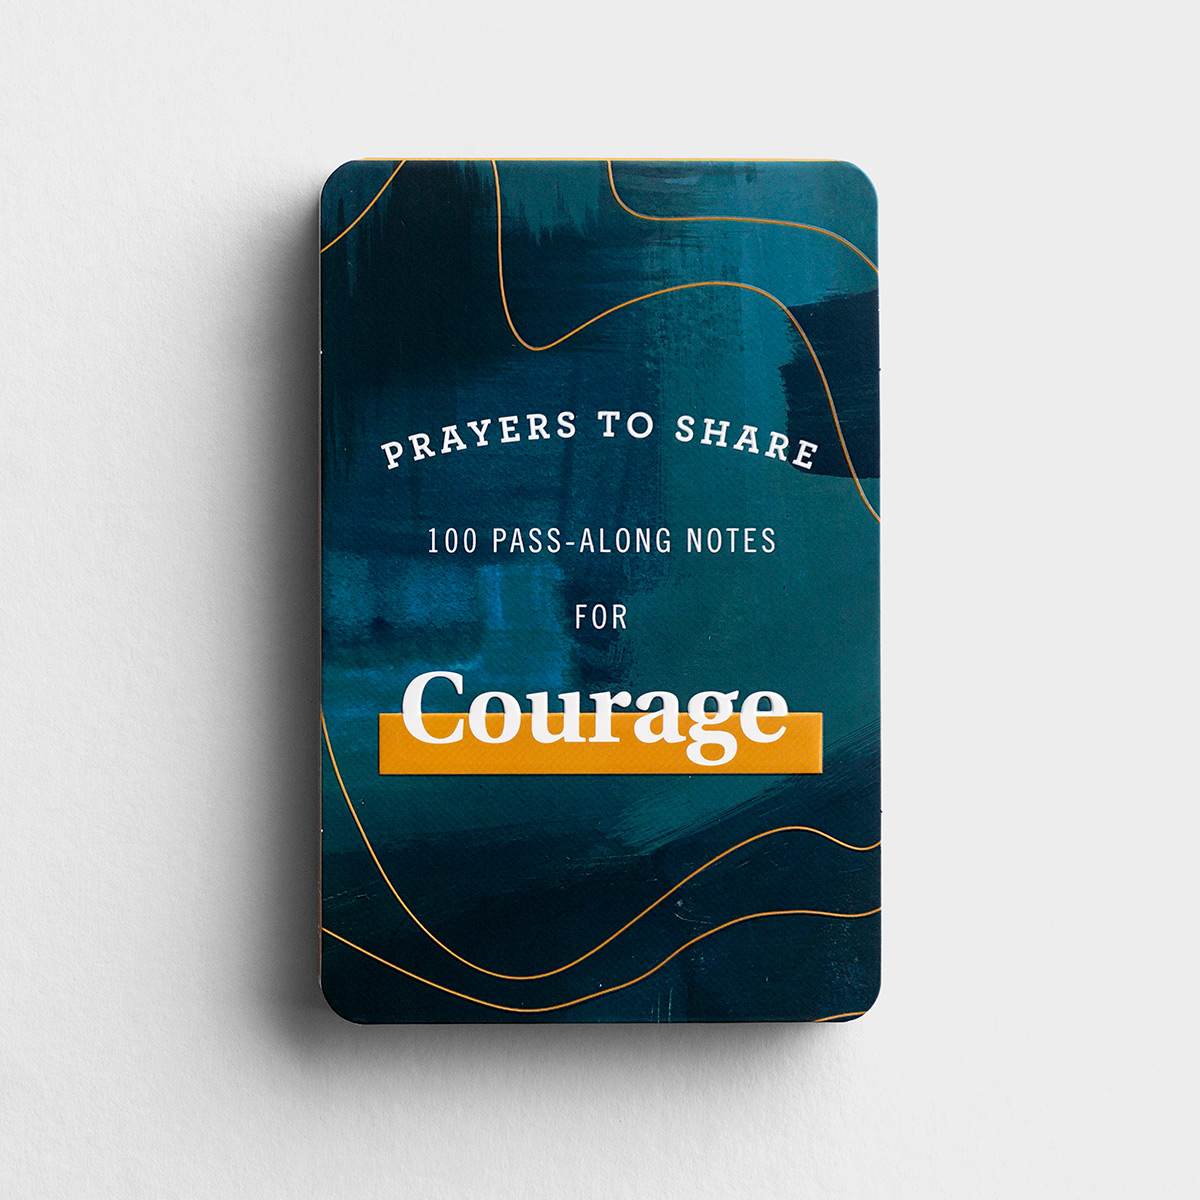 (in)courage - Prayers to Share: 100 Pass-Along Notes For Courage